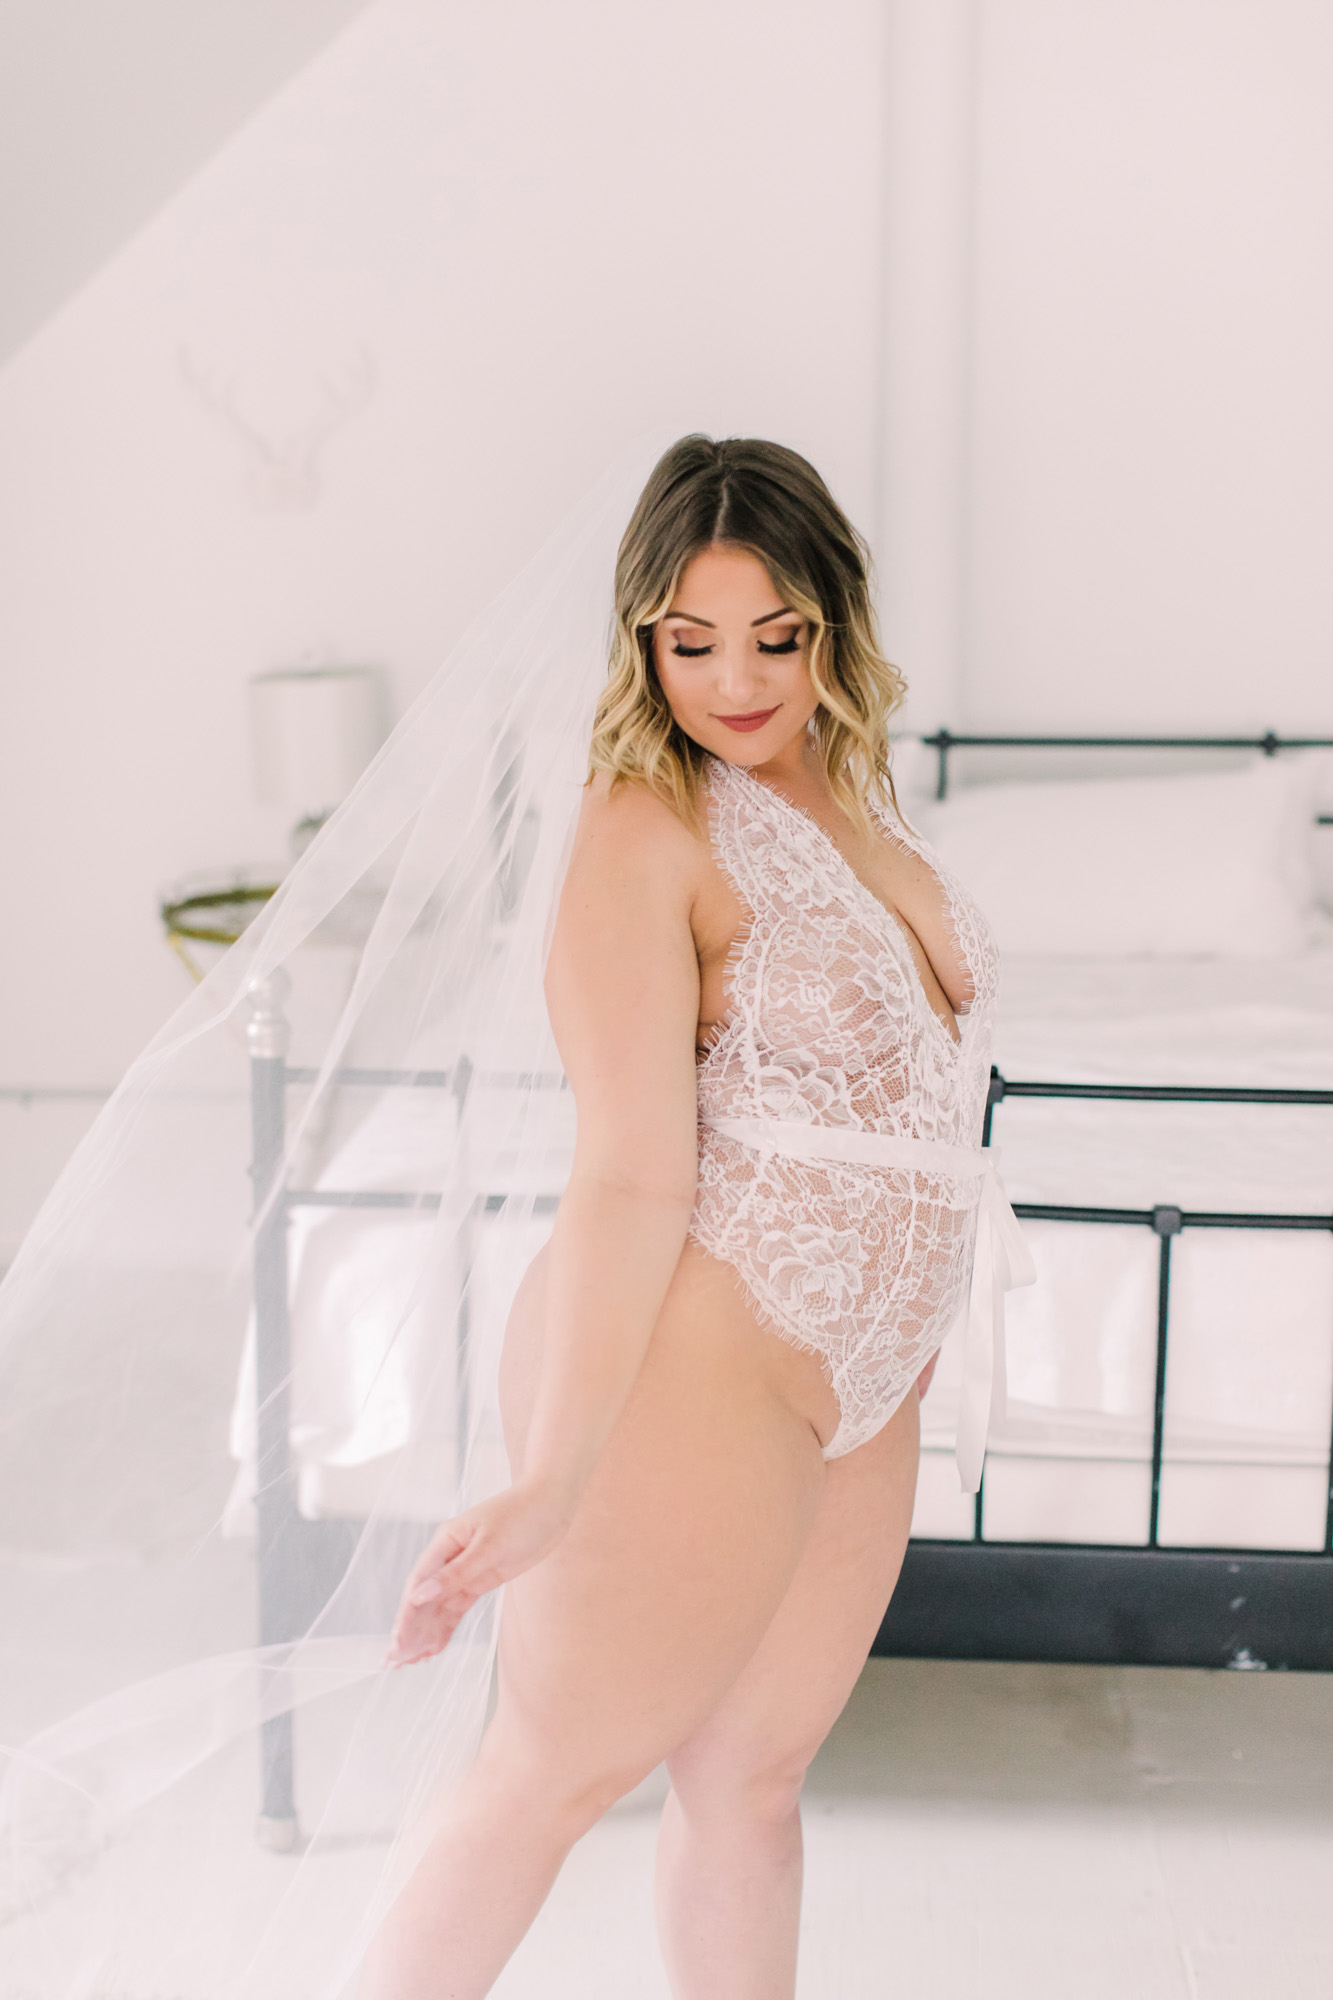 A bride wears white lingerie and a wedding veil for her bridal boudoir photo session in Chicago.